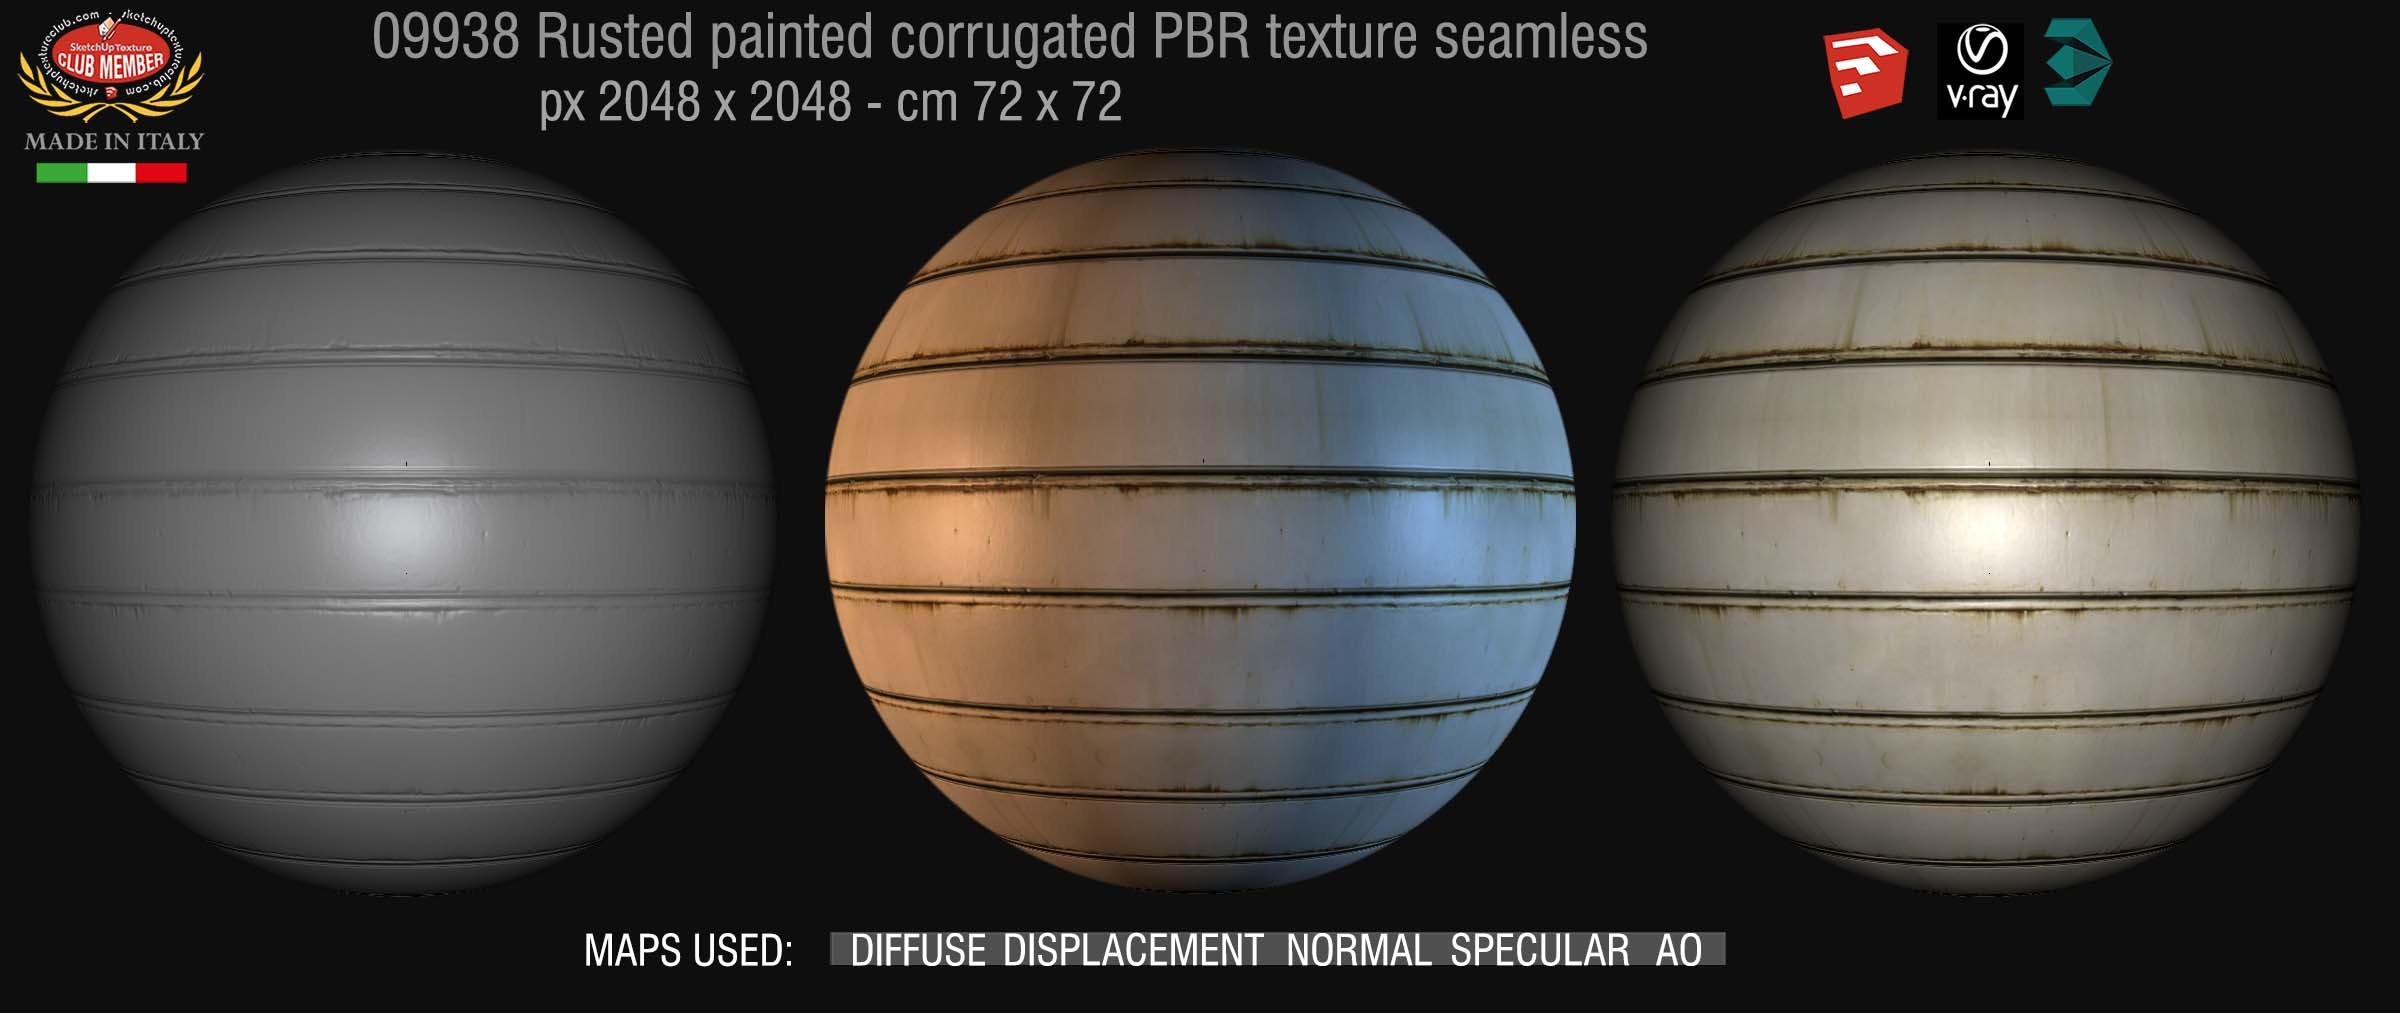 09938 Rusted painted corrugated metal PBR texture seamless DEMO